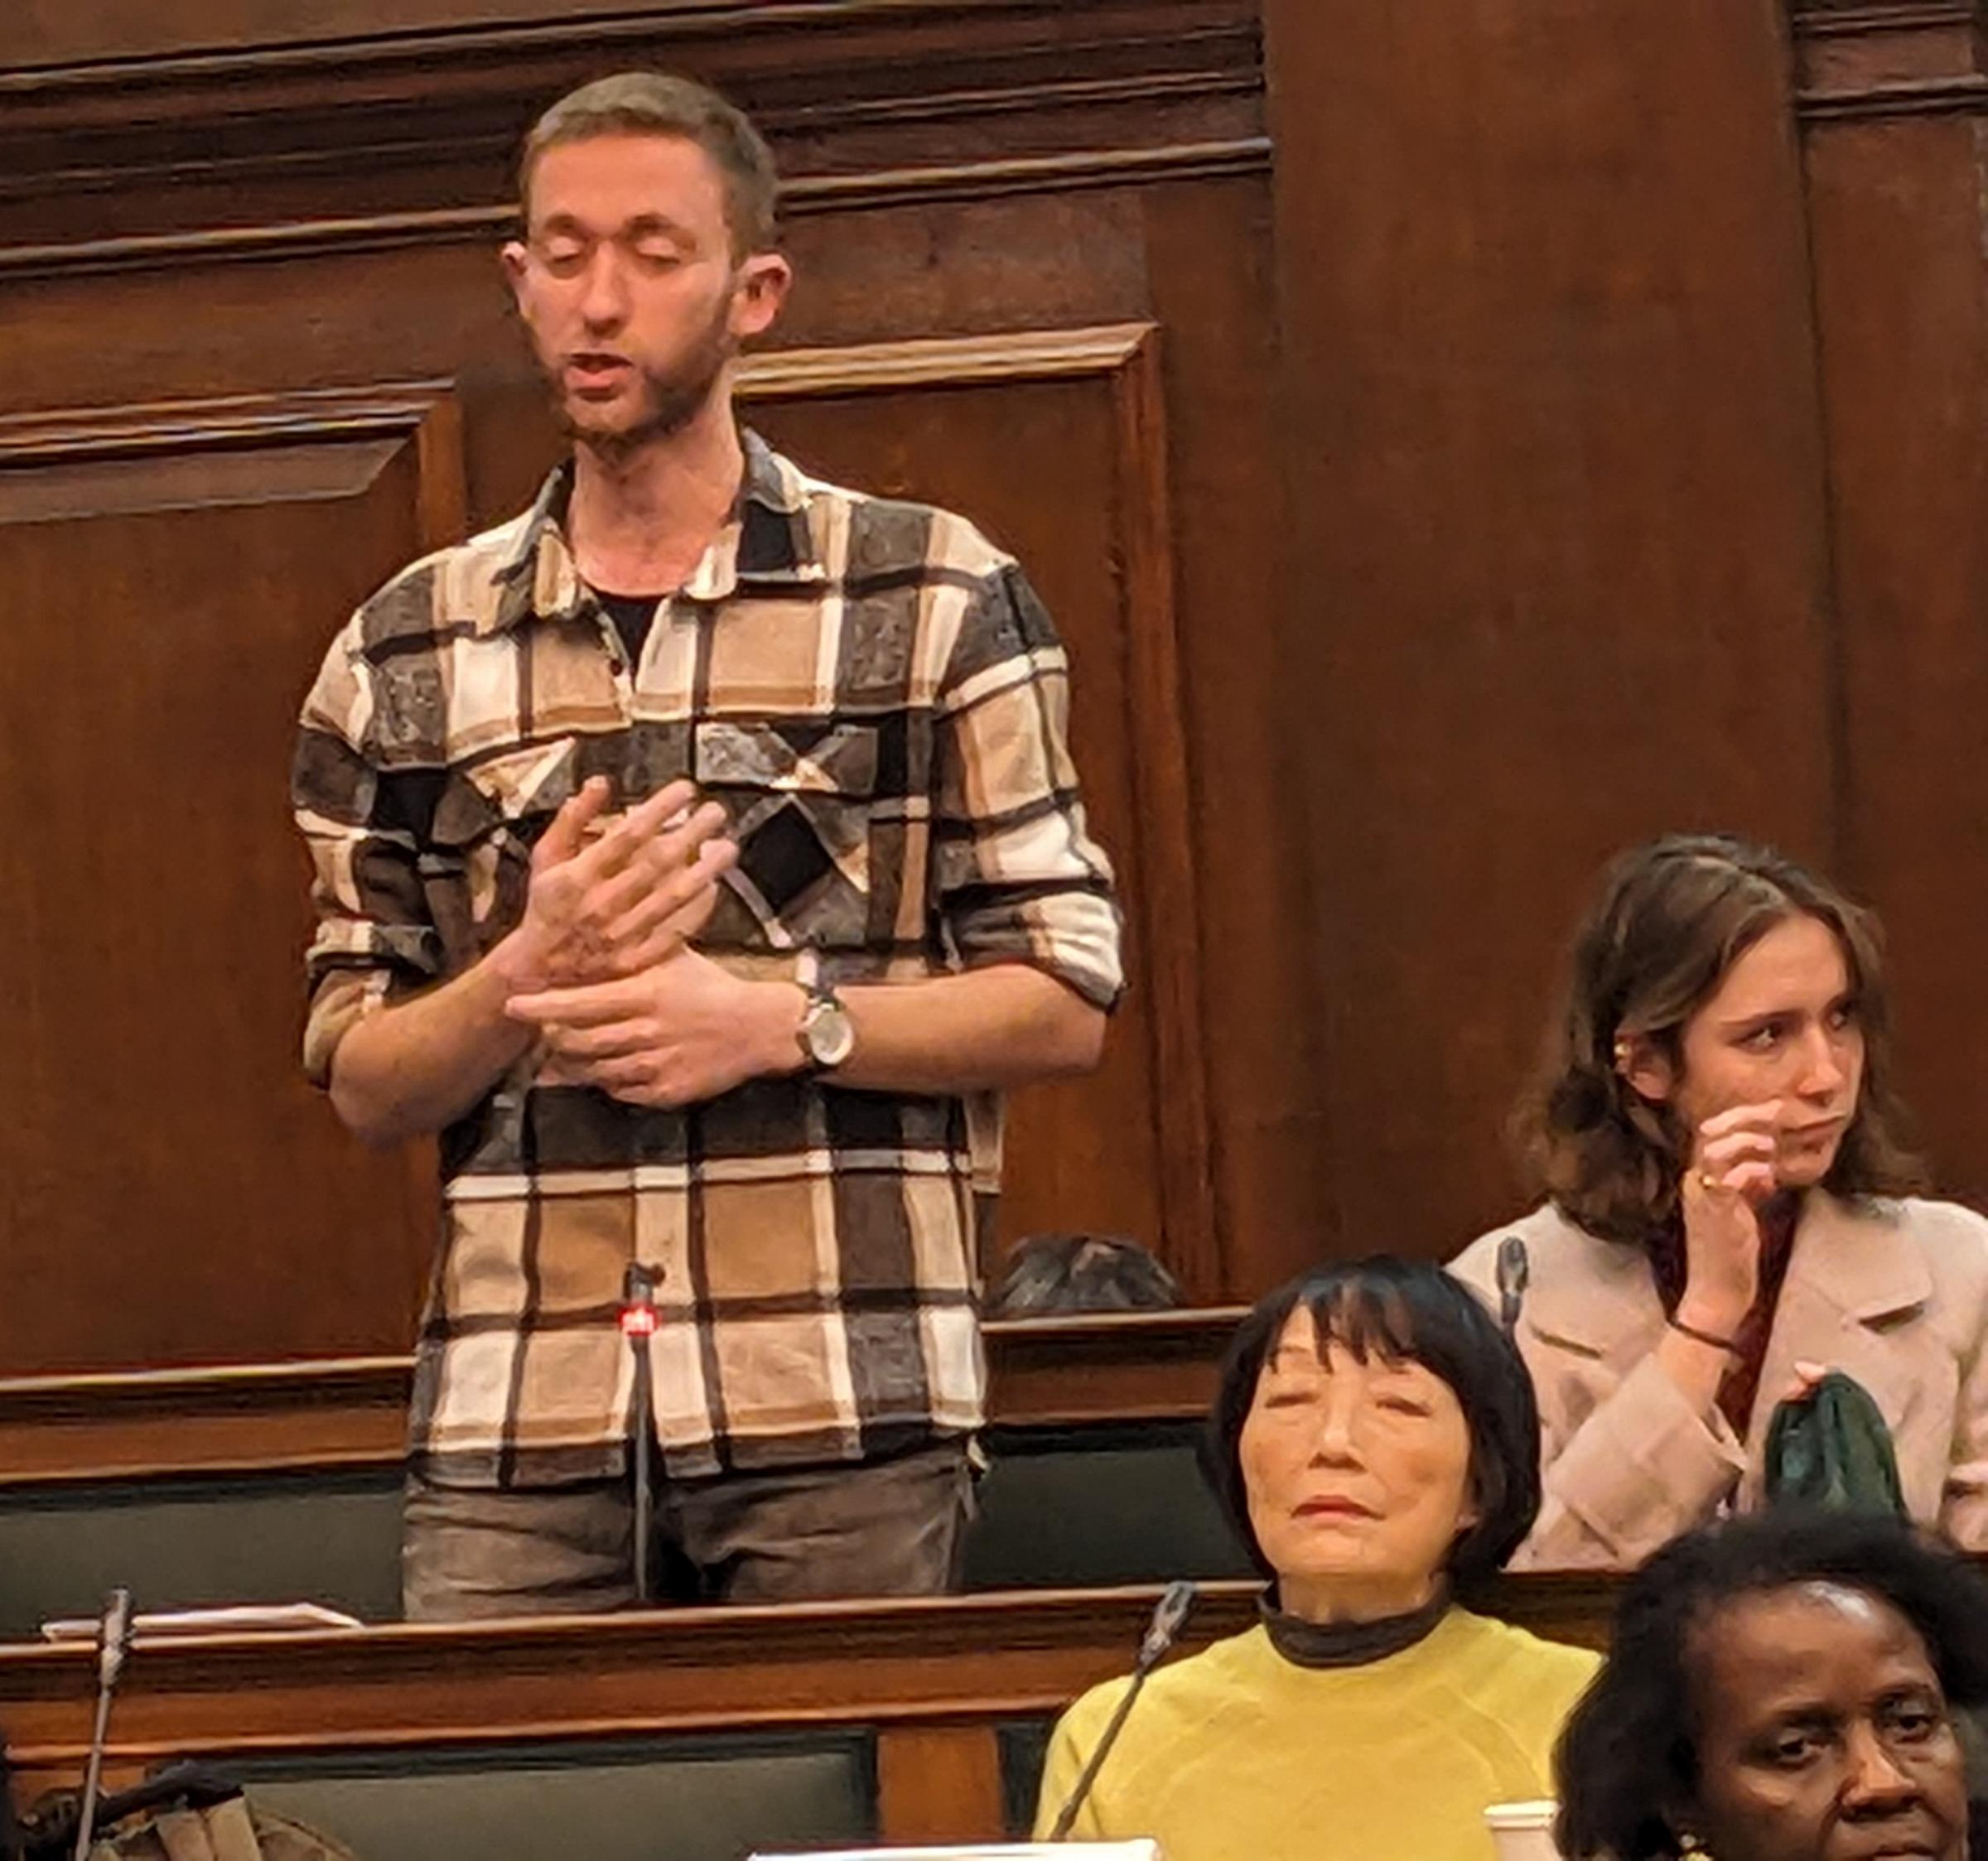 Sam Ebner-Landy asks Camden Council to ditch meat. Pic Julia Gregory, free for use by partners of BBC news wire service